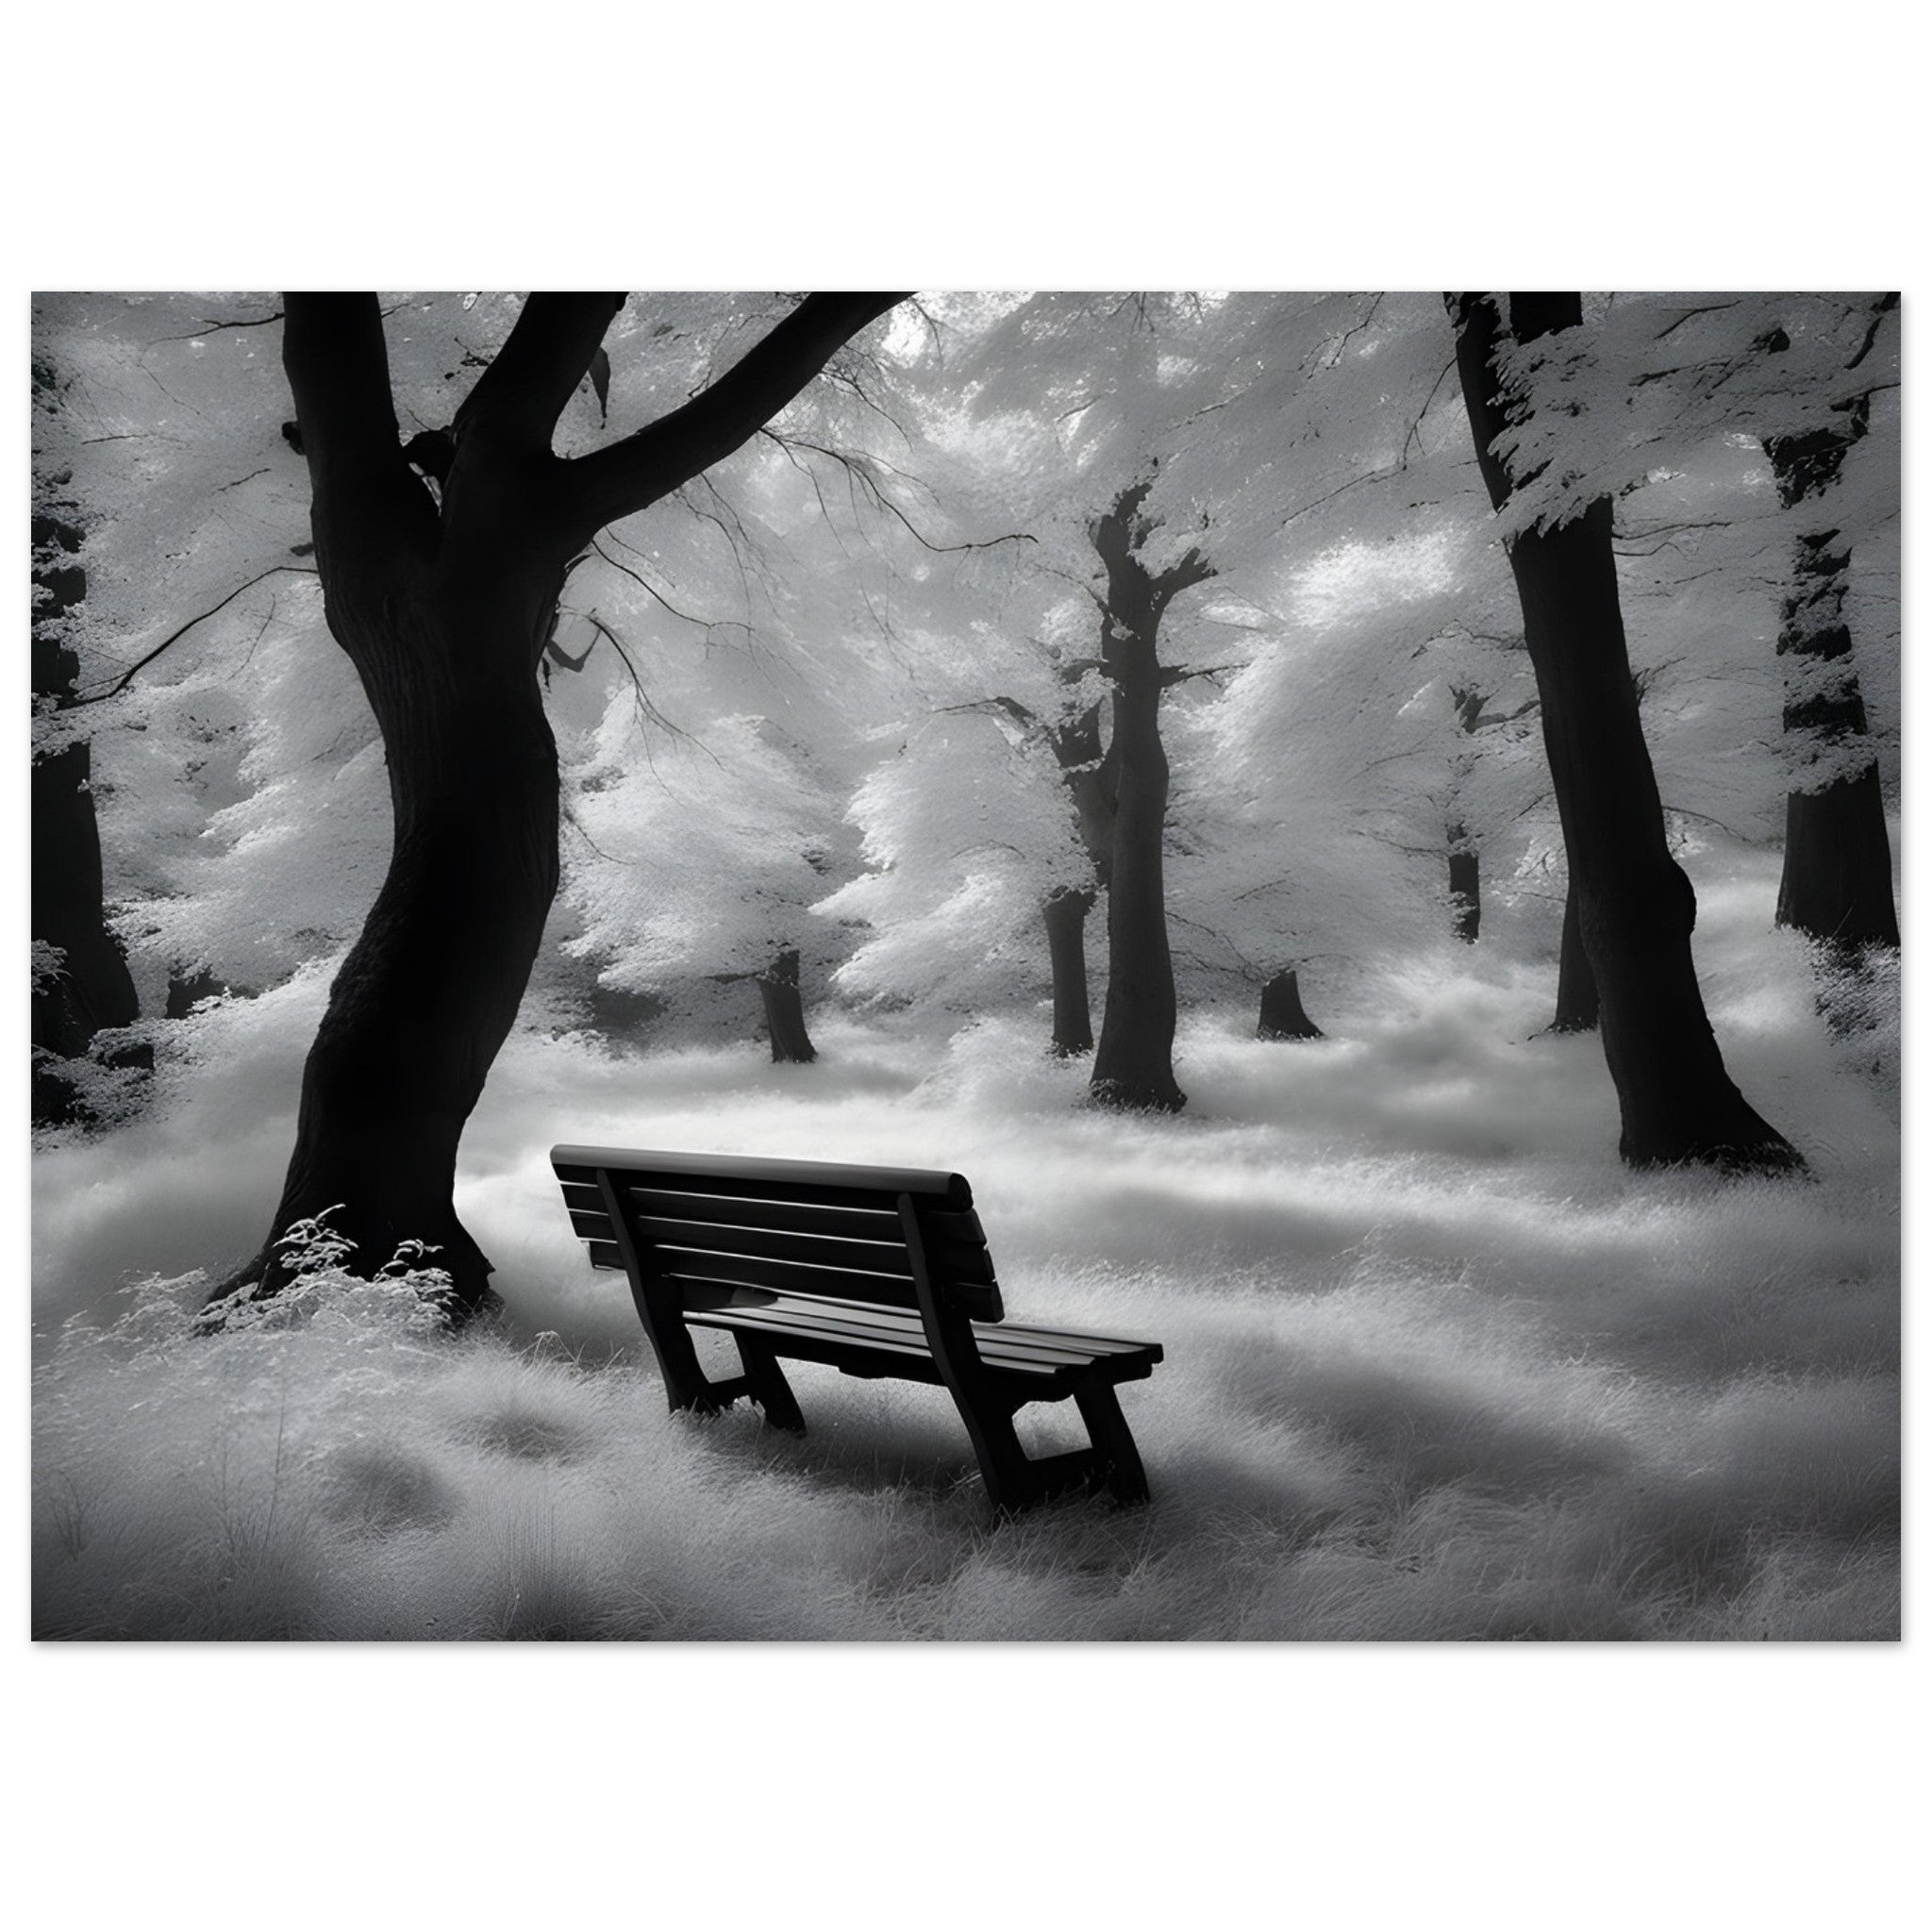 Our Seat In The Woods By Reflectapix - Wall art, home decor, kitchen art, wall decor, wall murals, wall prints, room decor, artwork prints, wall artwork, art to print, art on wall